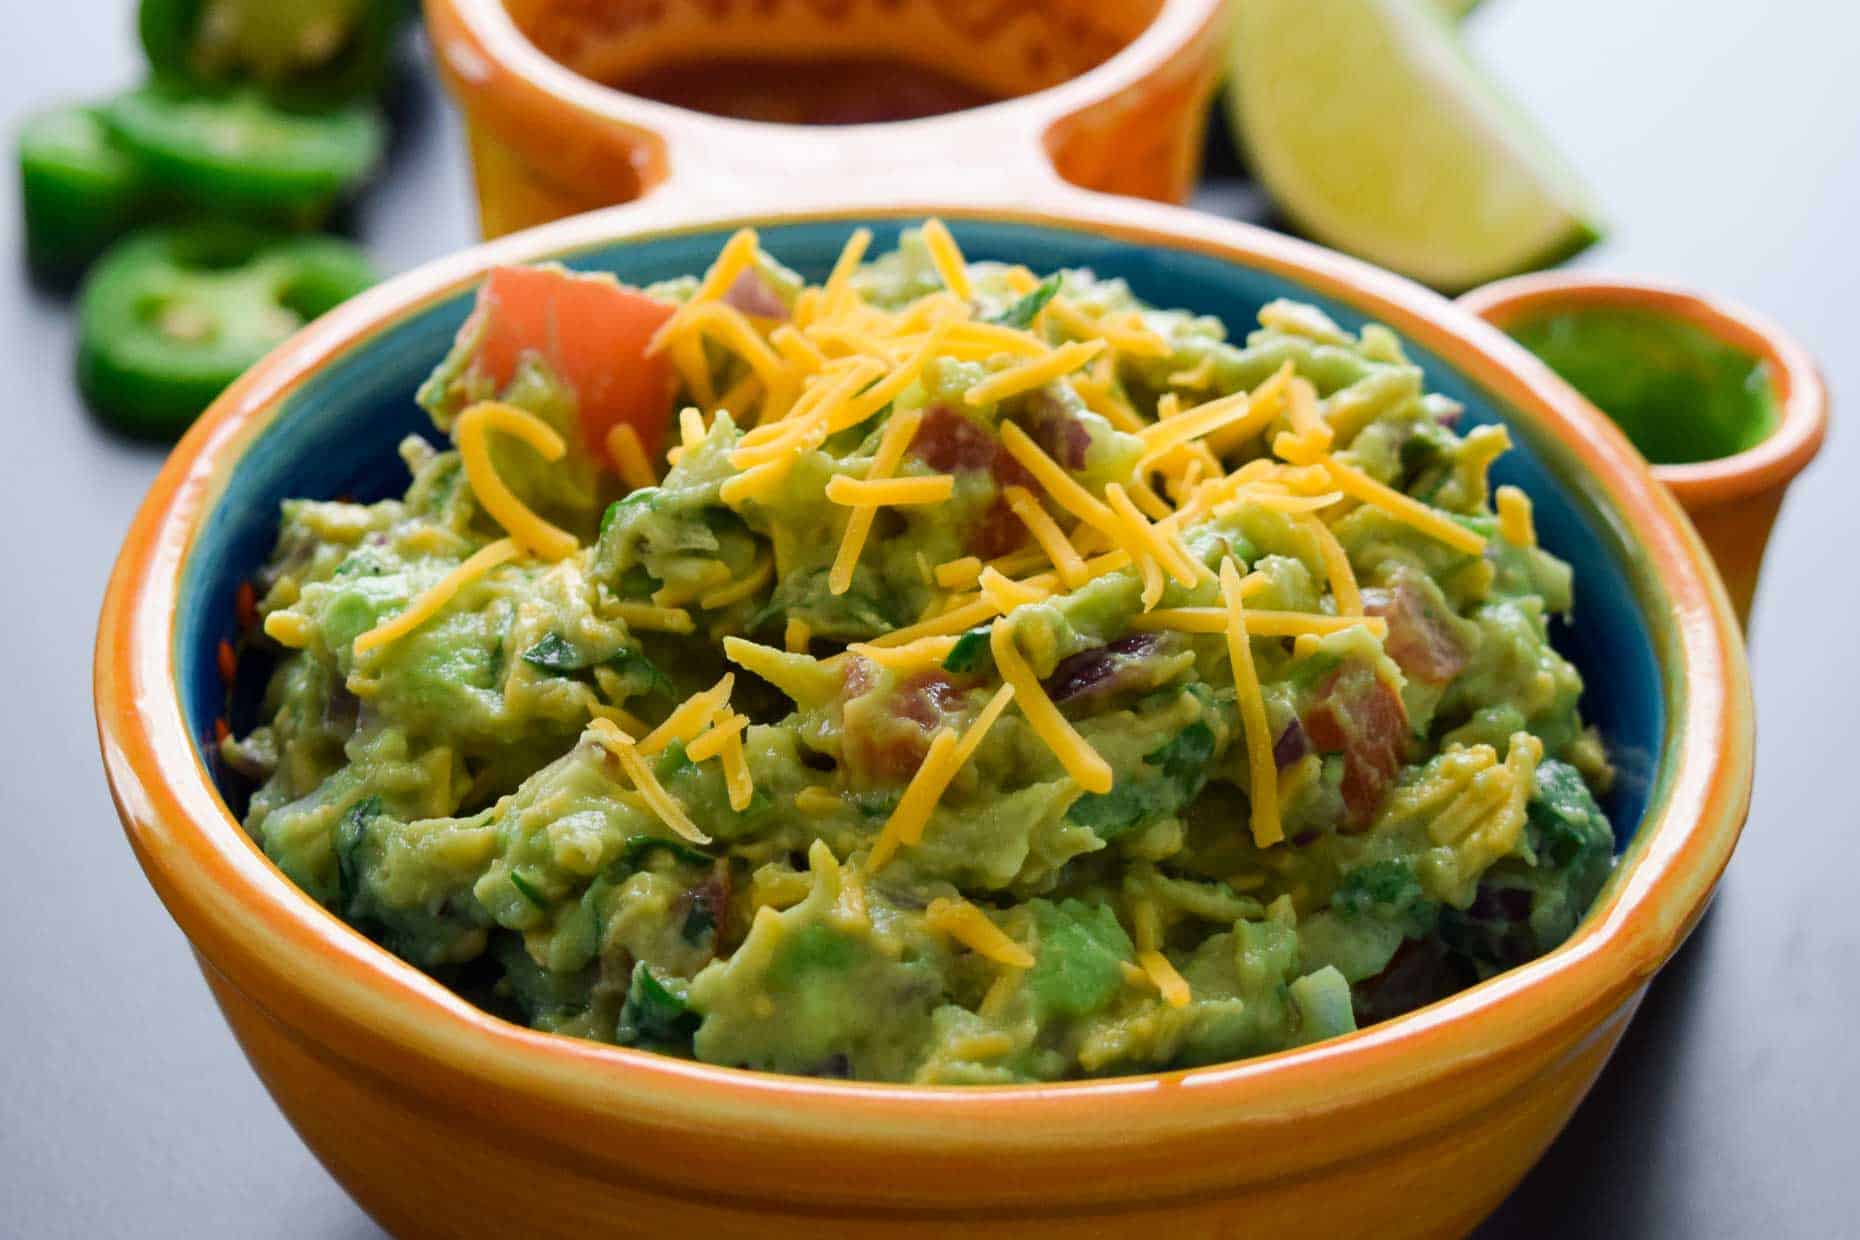 Cheesy Guacamole served in Mexican dish side view